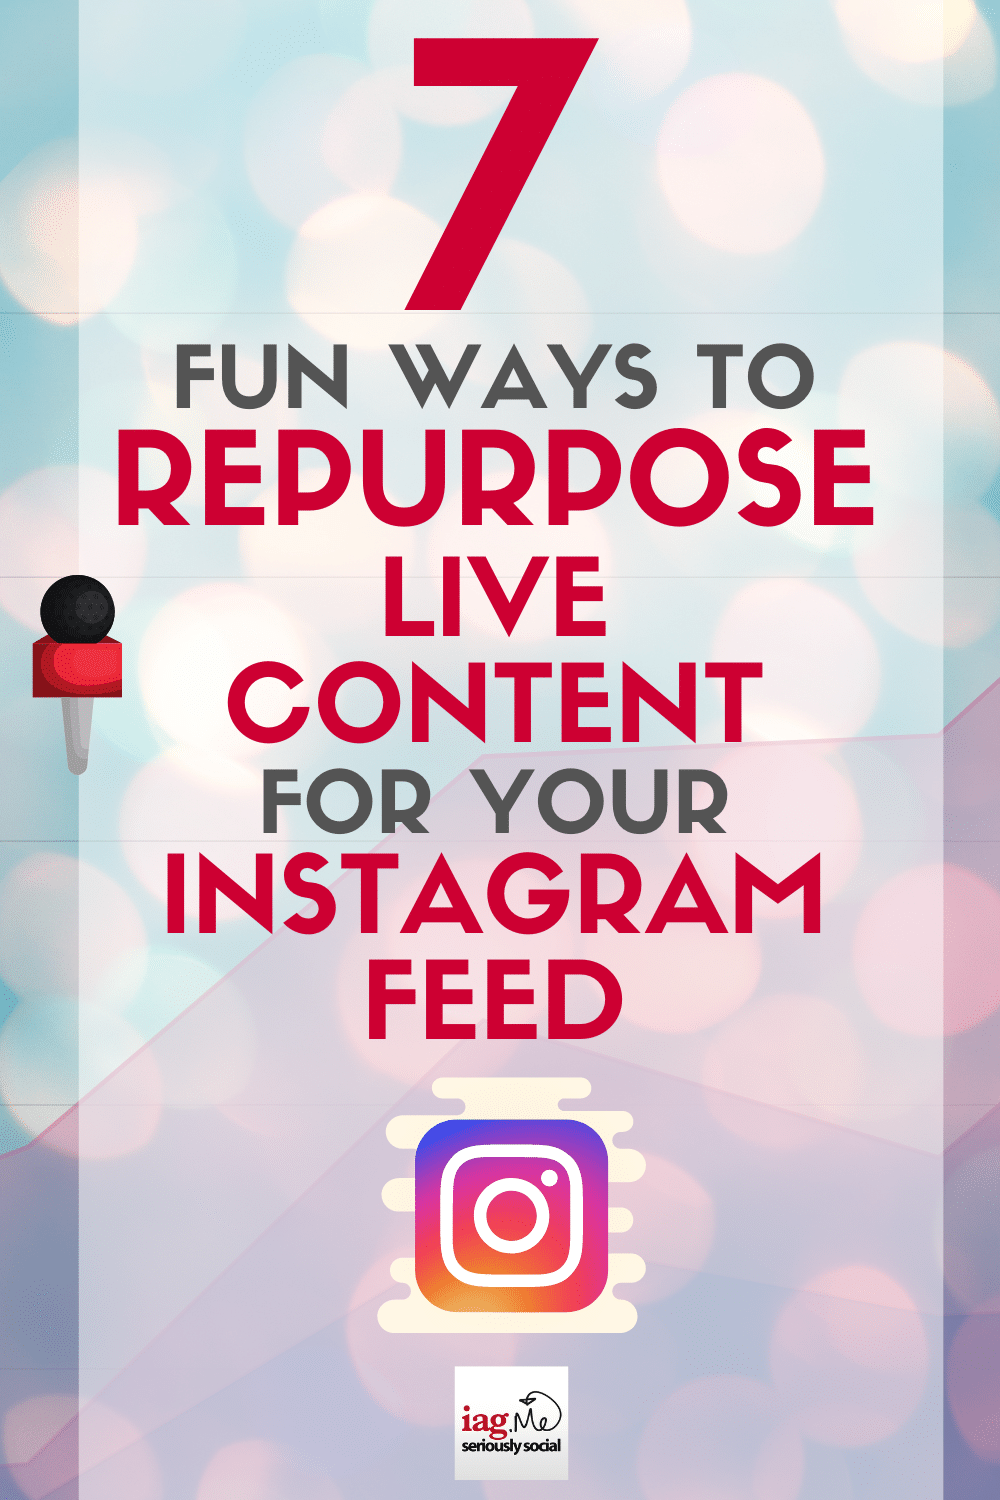 7 Fun Ways to Repurpose Live Content for Your Instagram Feed